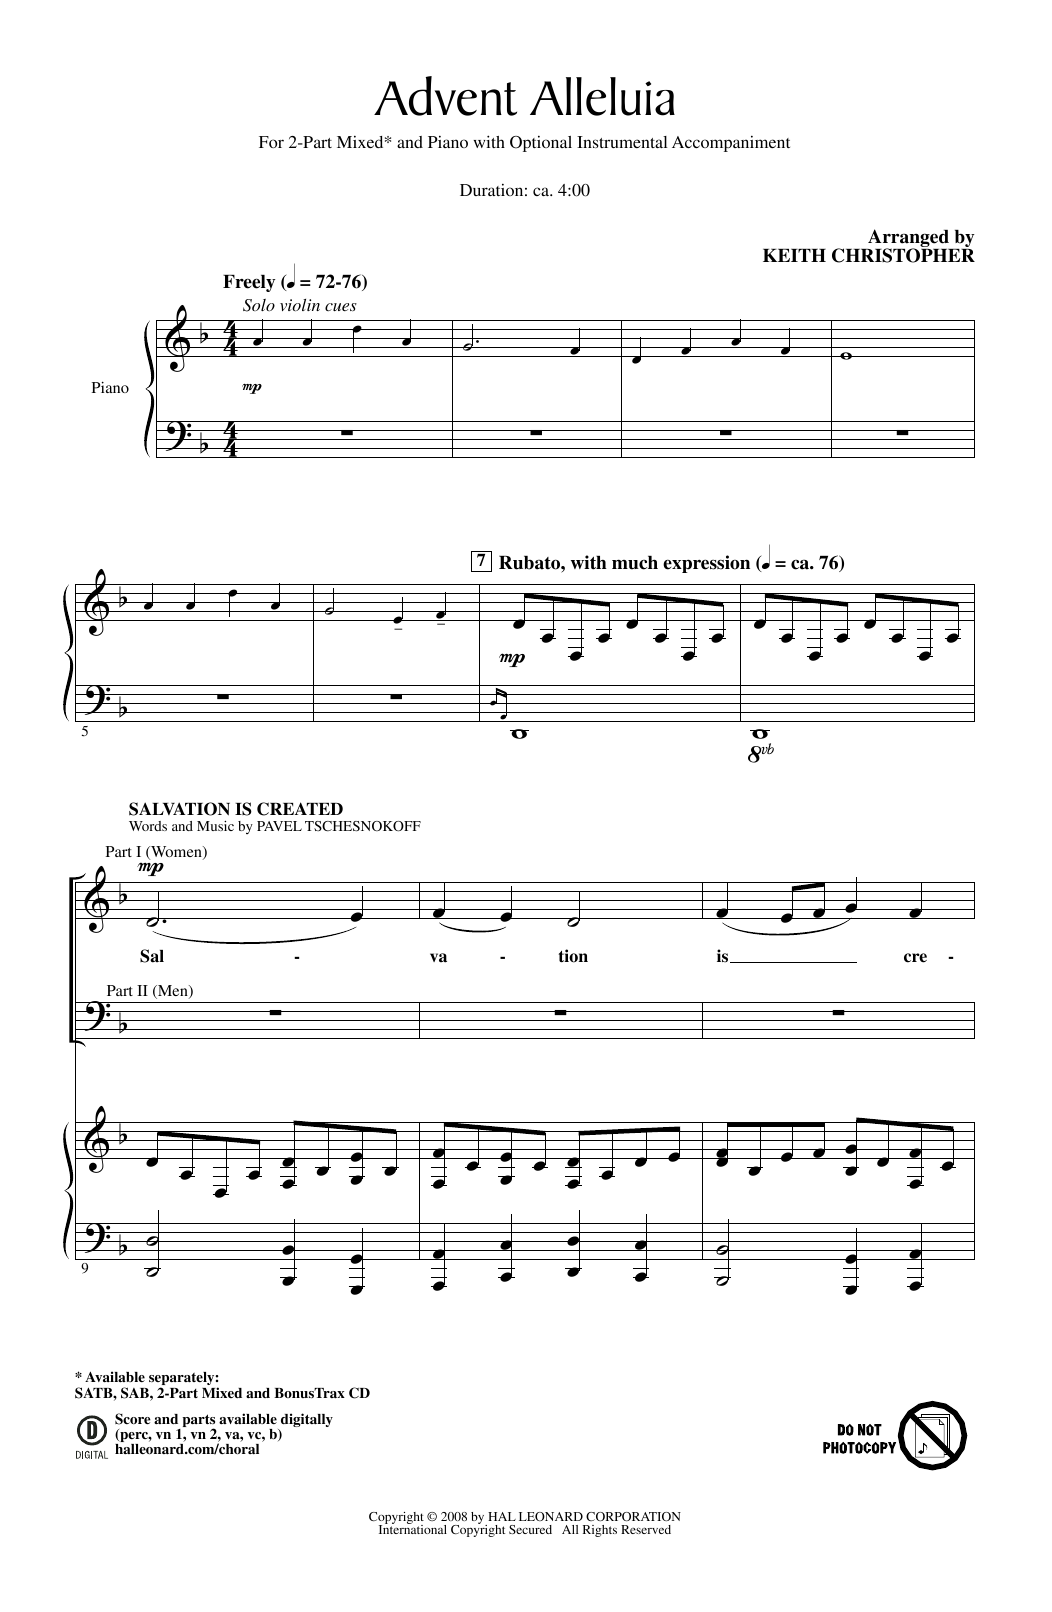 Download Keith Christopher Advent Alleluia Sheet Music